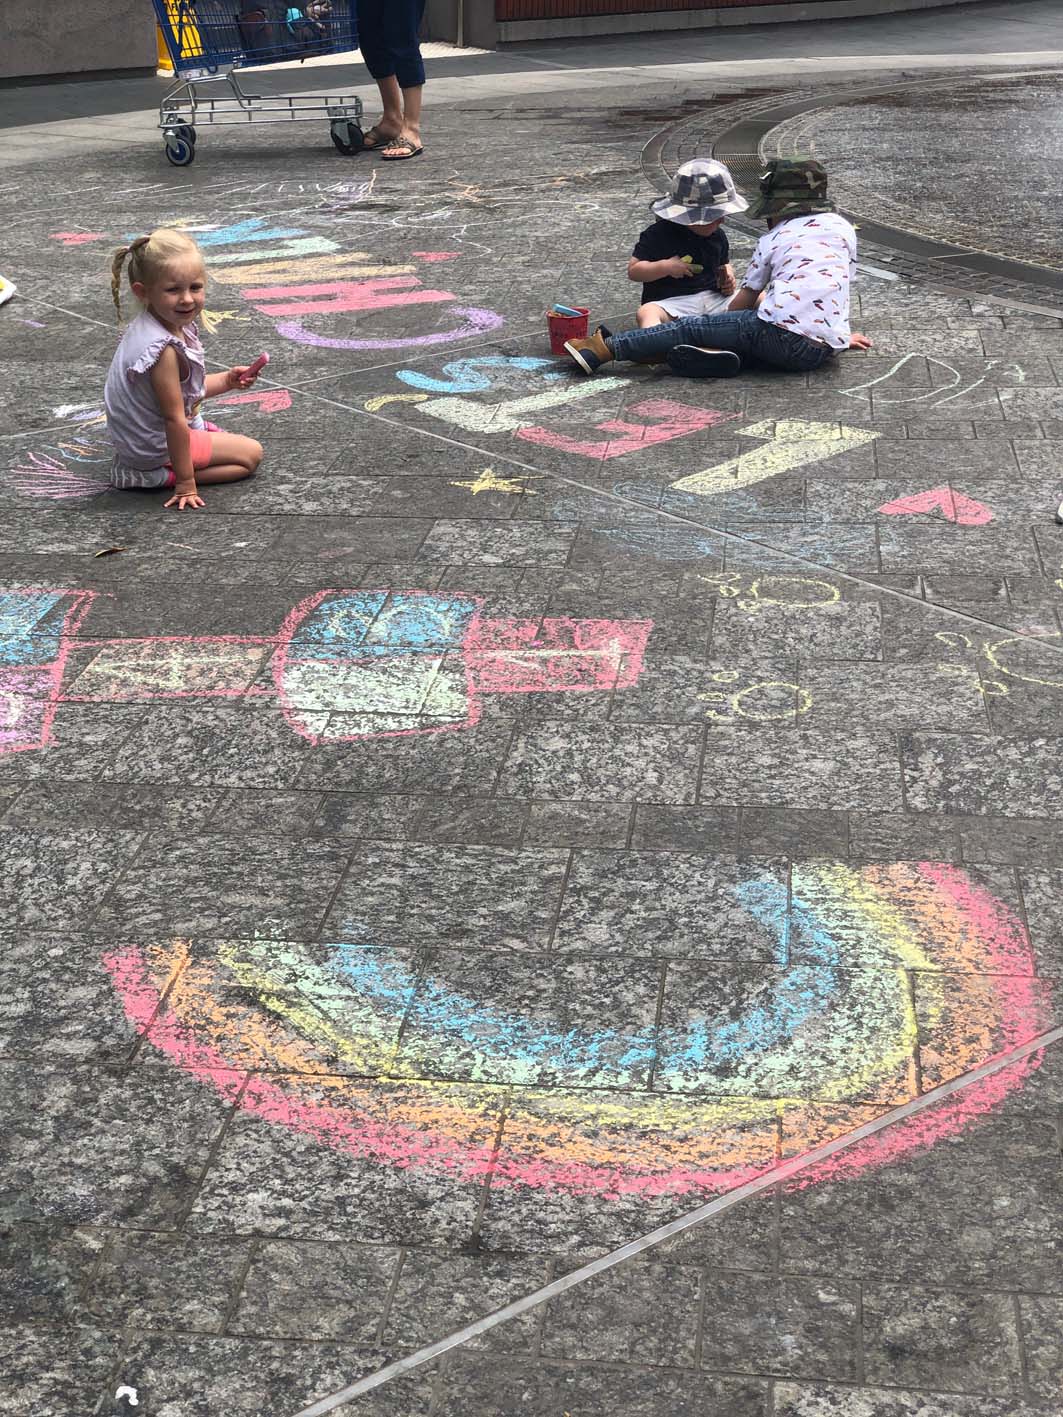 Let's chalk about Mental Health